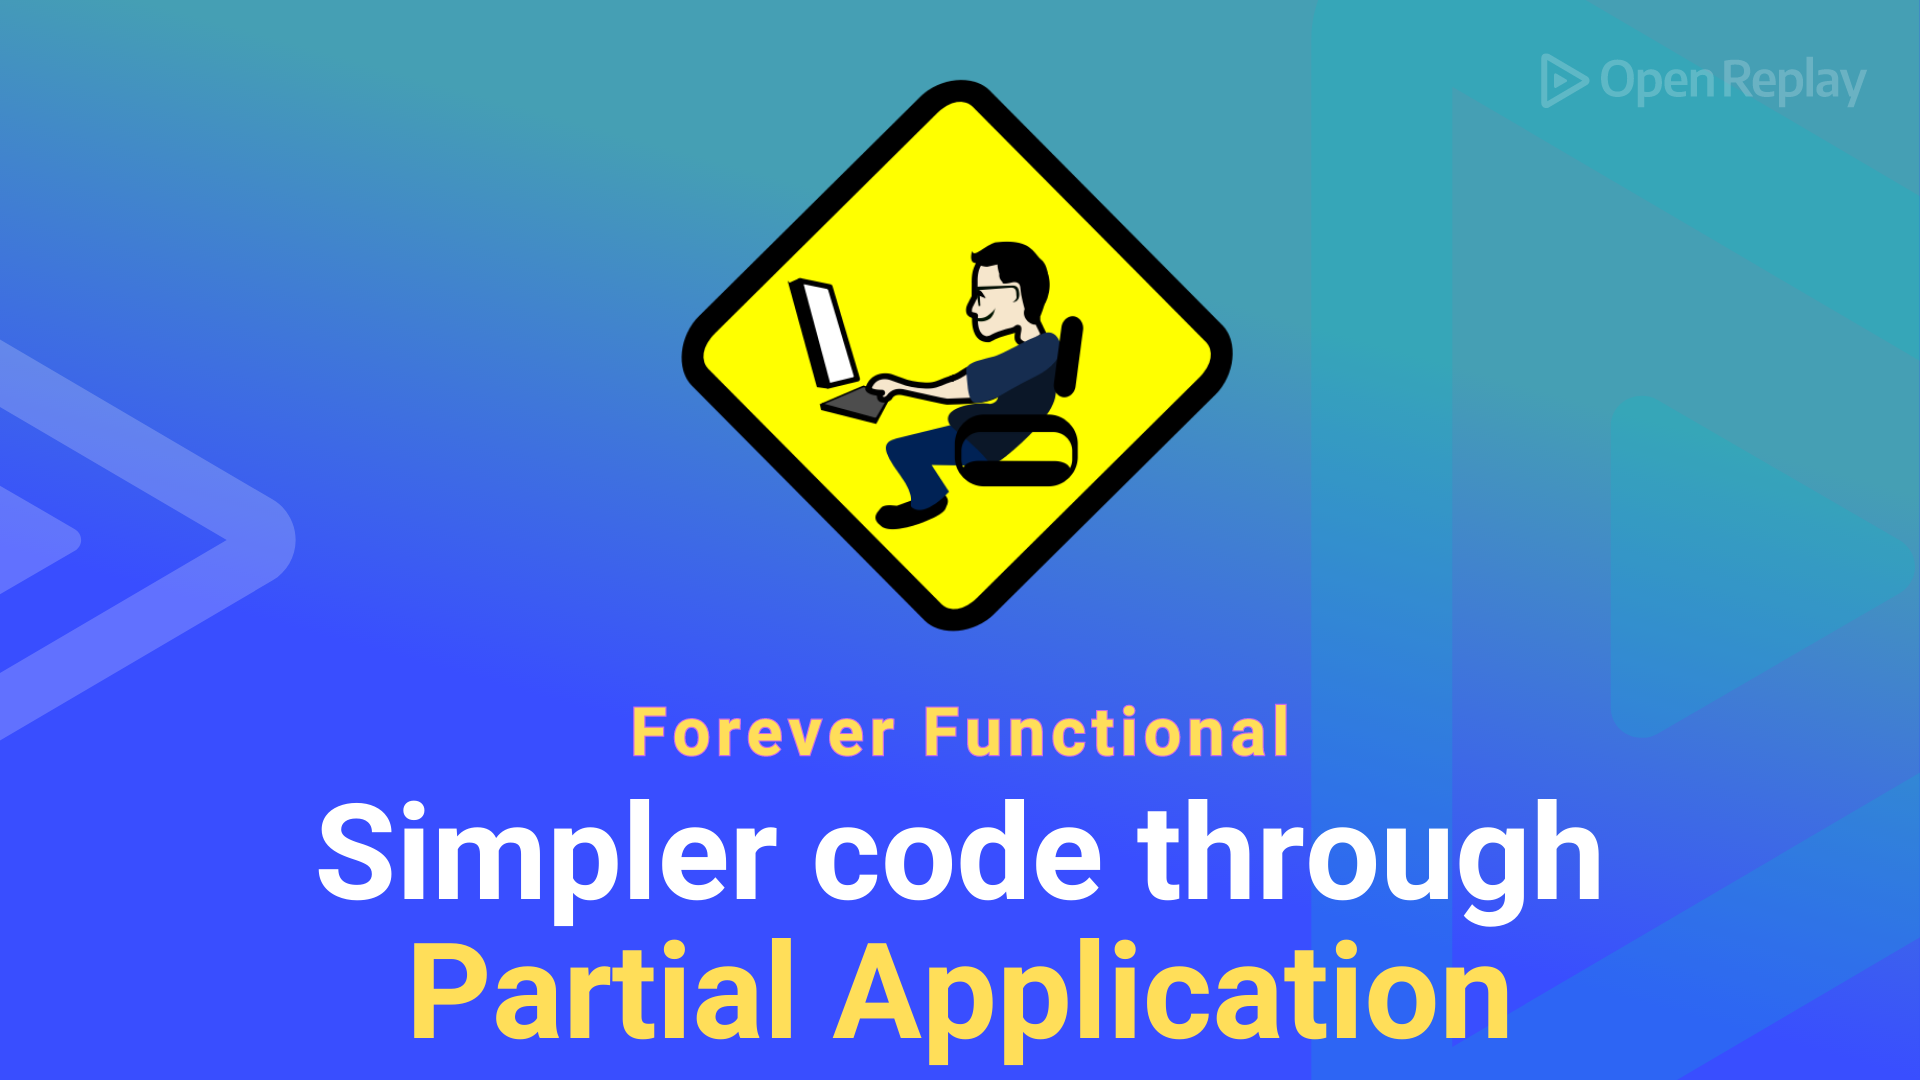 Forever Functional: Simpler code through Partial Application